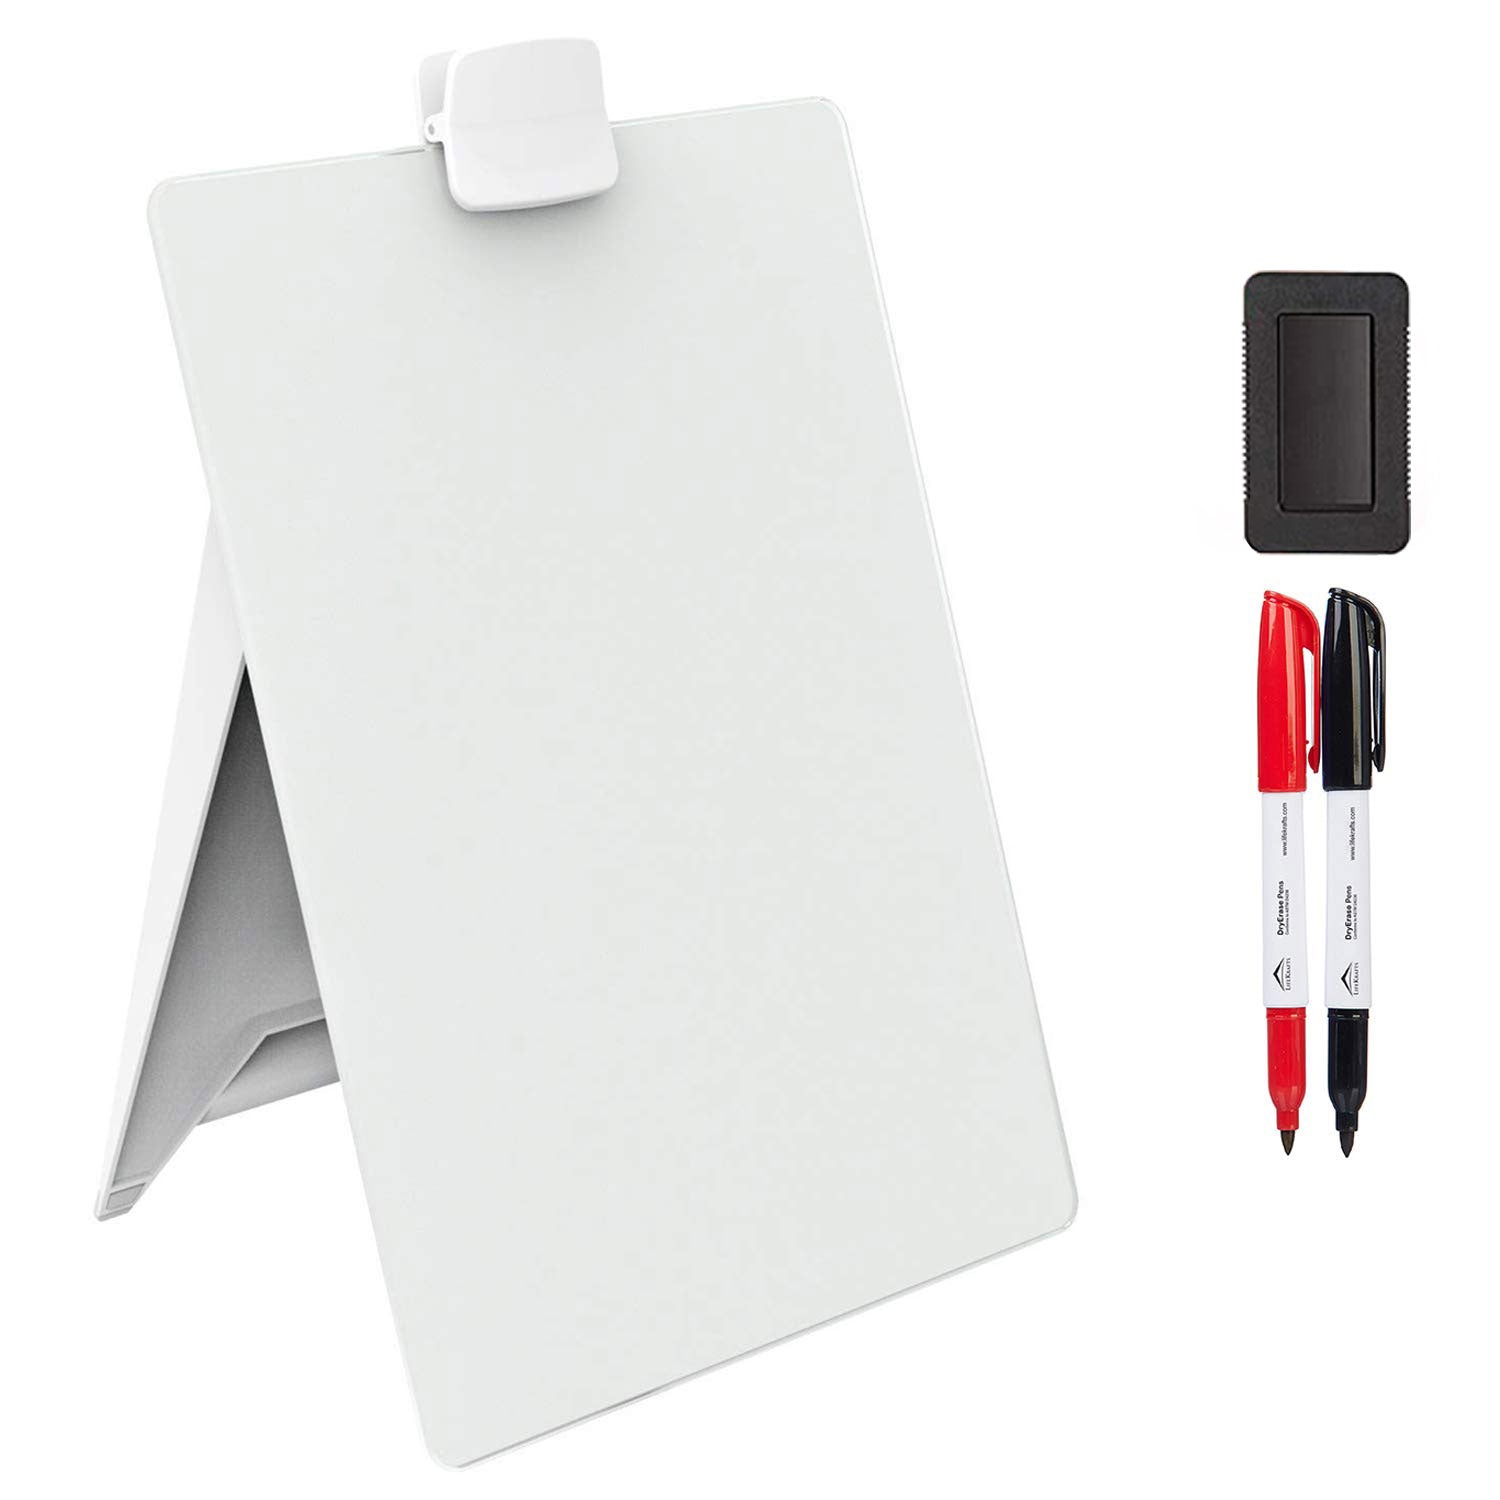 Non-Magnetic Glass Whiteboard (9 x 12 inches ) for Table Desk, Office, Home